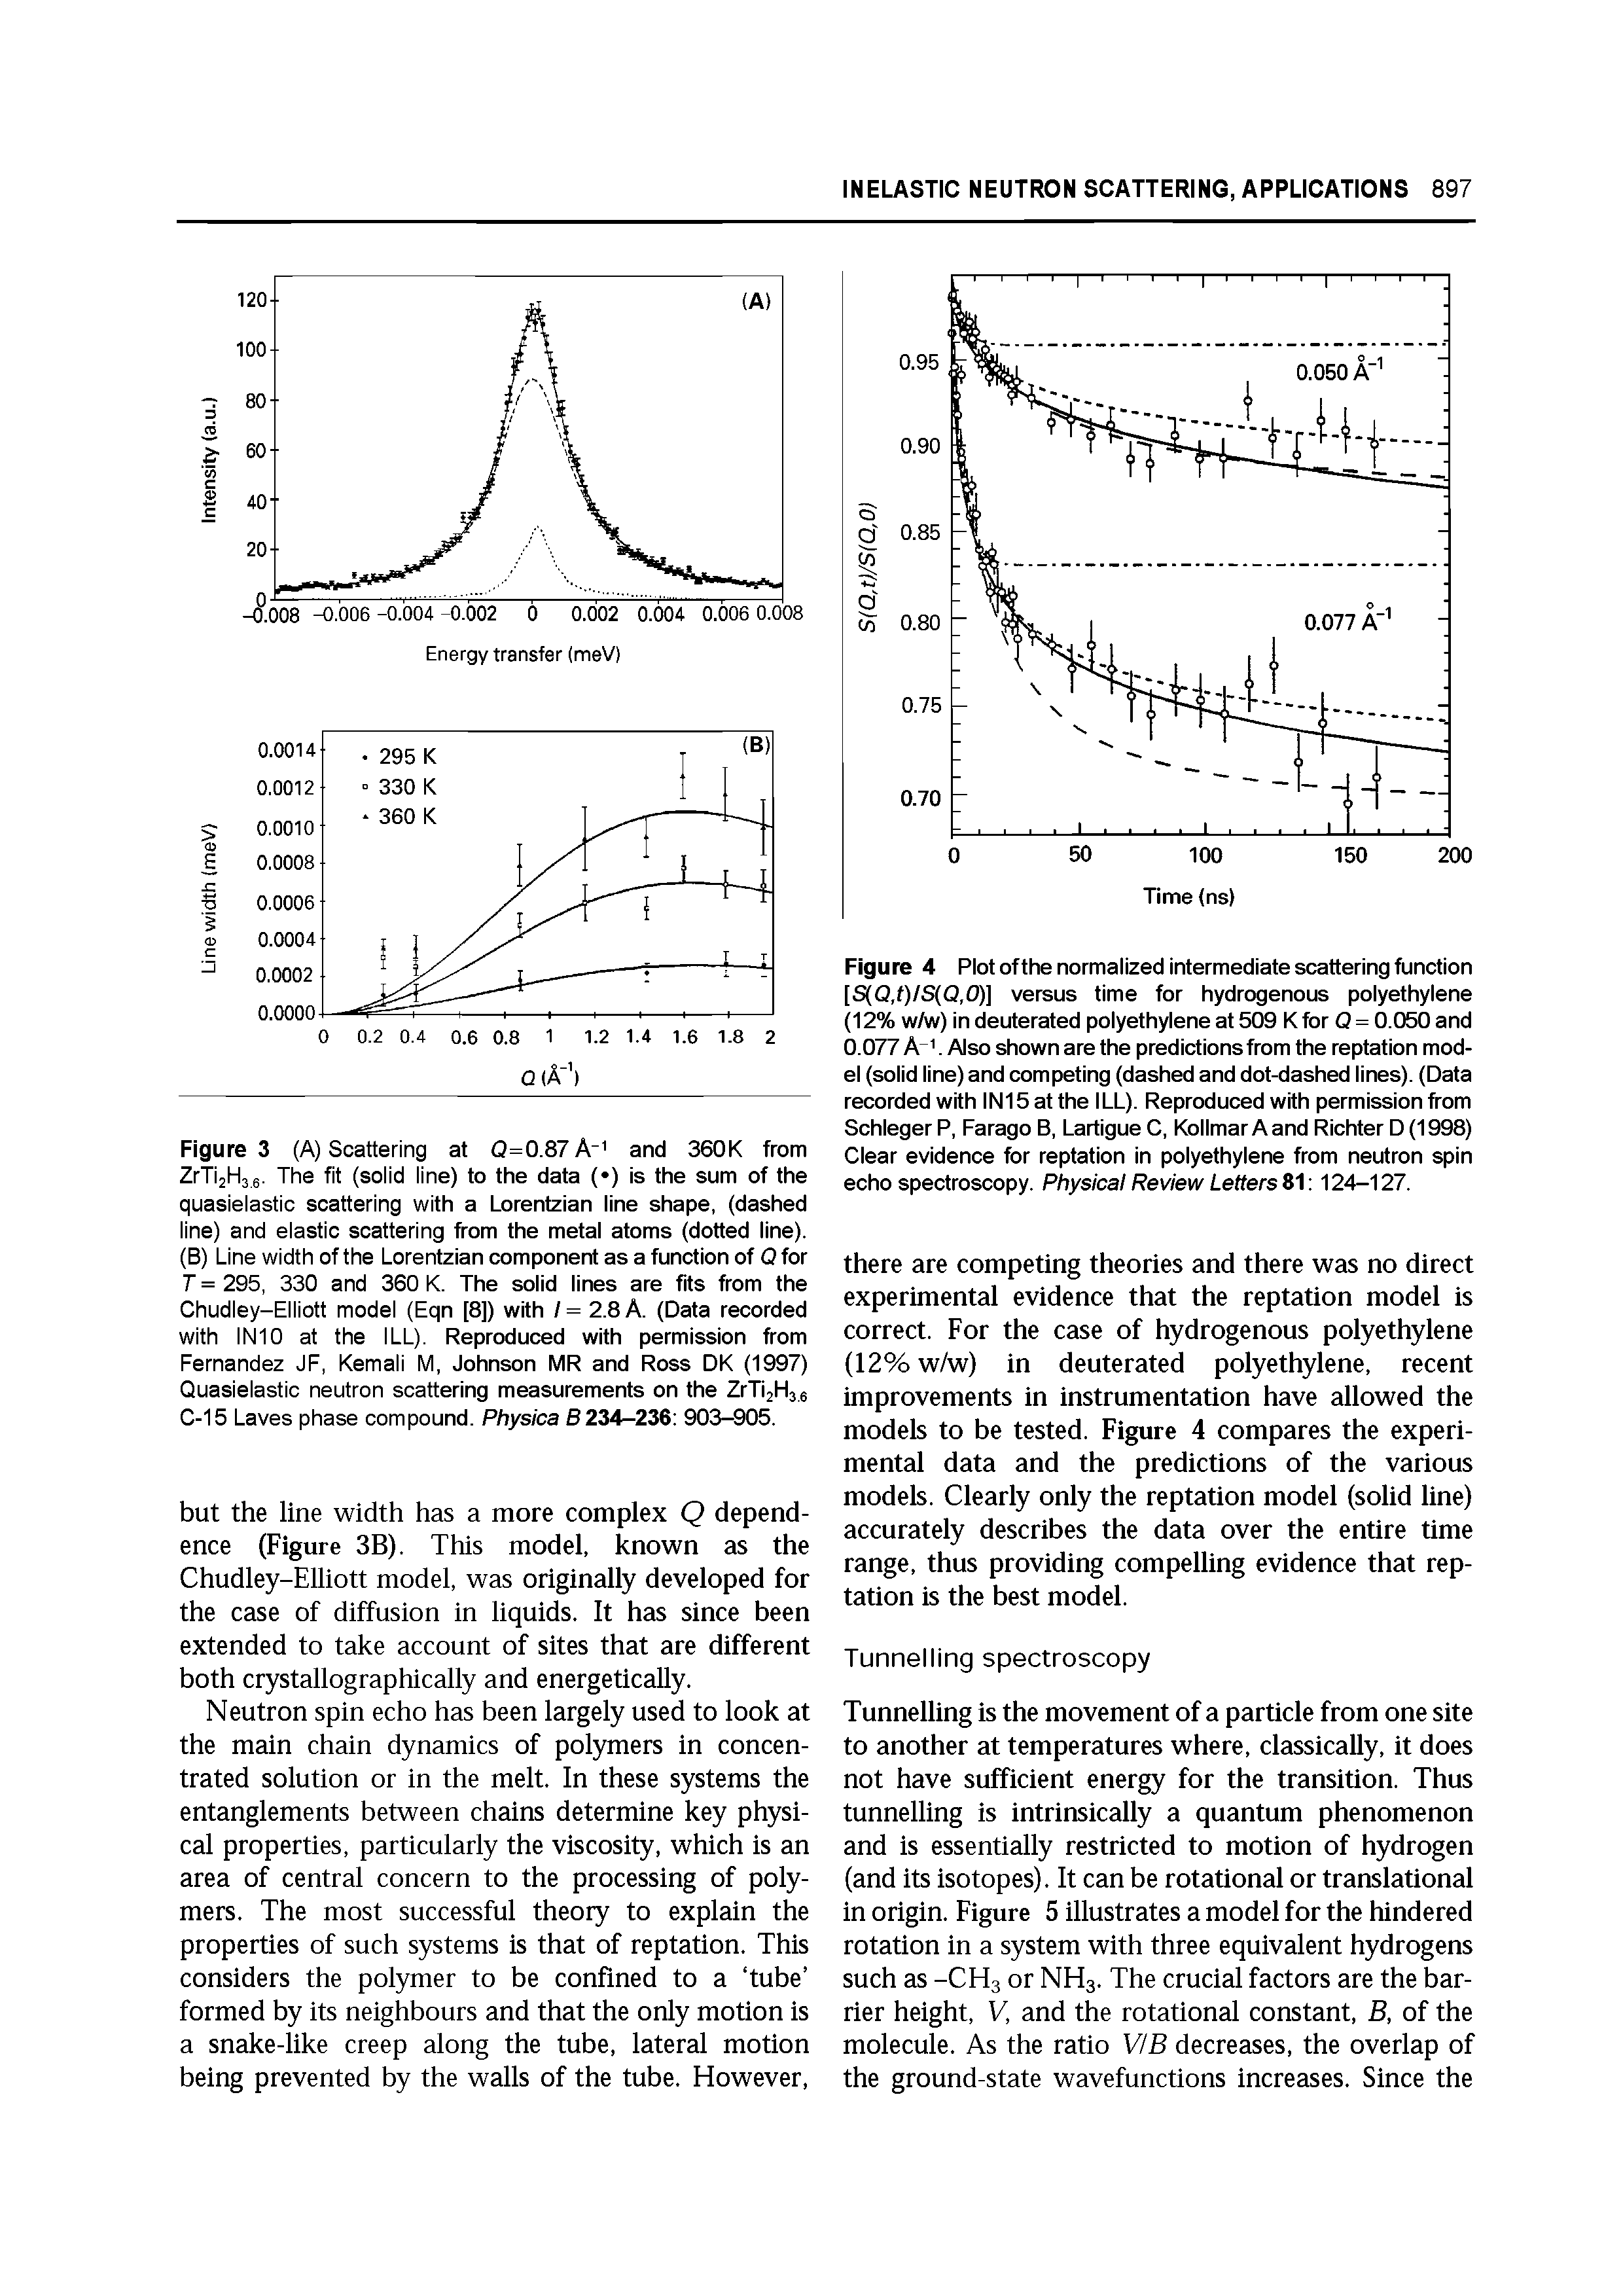 Figure 4 Plot of the normalized intermediate scattering function [S(Q,f)/S(Q.O)] versus time for hydrogenous polyethylene (12% w/w) in deuterated polyethylene at 509 K for Q = 0.050 and 0.077 A . Also shown are the predictions from the reptation model (solid line) and competing (dashed and dot-dashed lines). (Data recorded with IN15 at the ILL). Reproduced with permission from Schleger P, Farago B, Lartigue C, Kollmar Aand Richter D (1998) Clear evidence for reptation in polyethylene from neutron spin echo spectroscopy. Physical Review Letters 81 124-127.